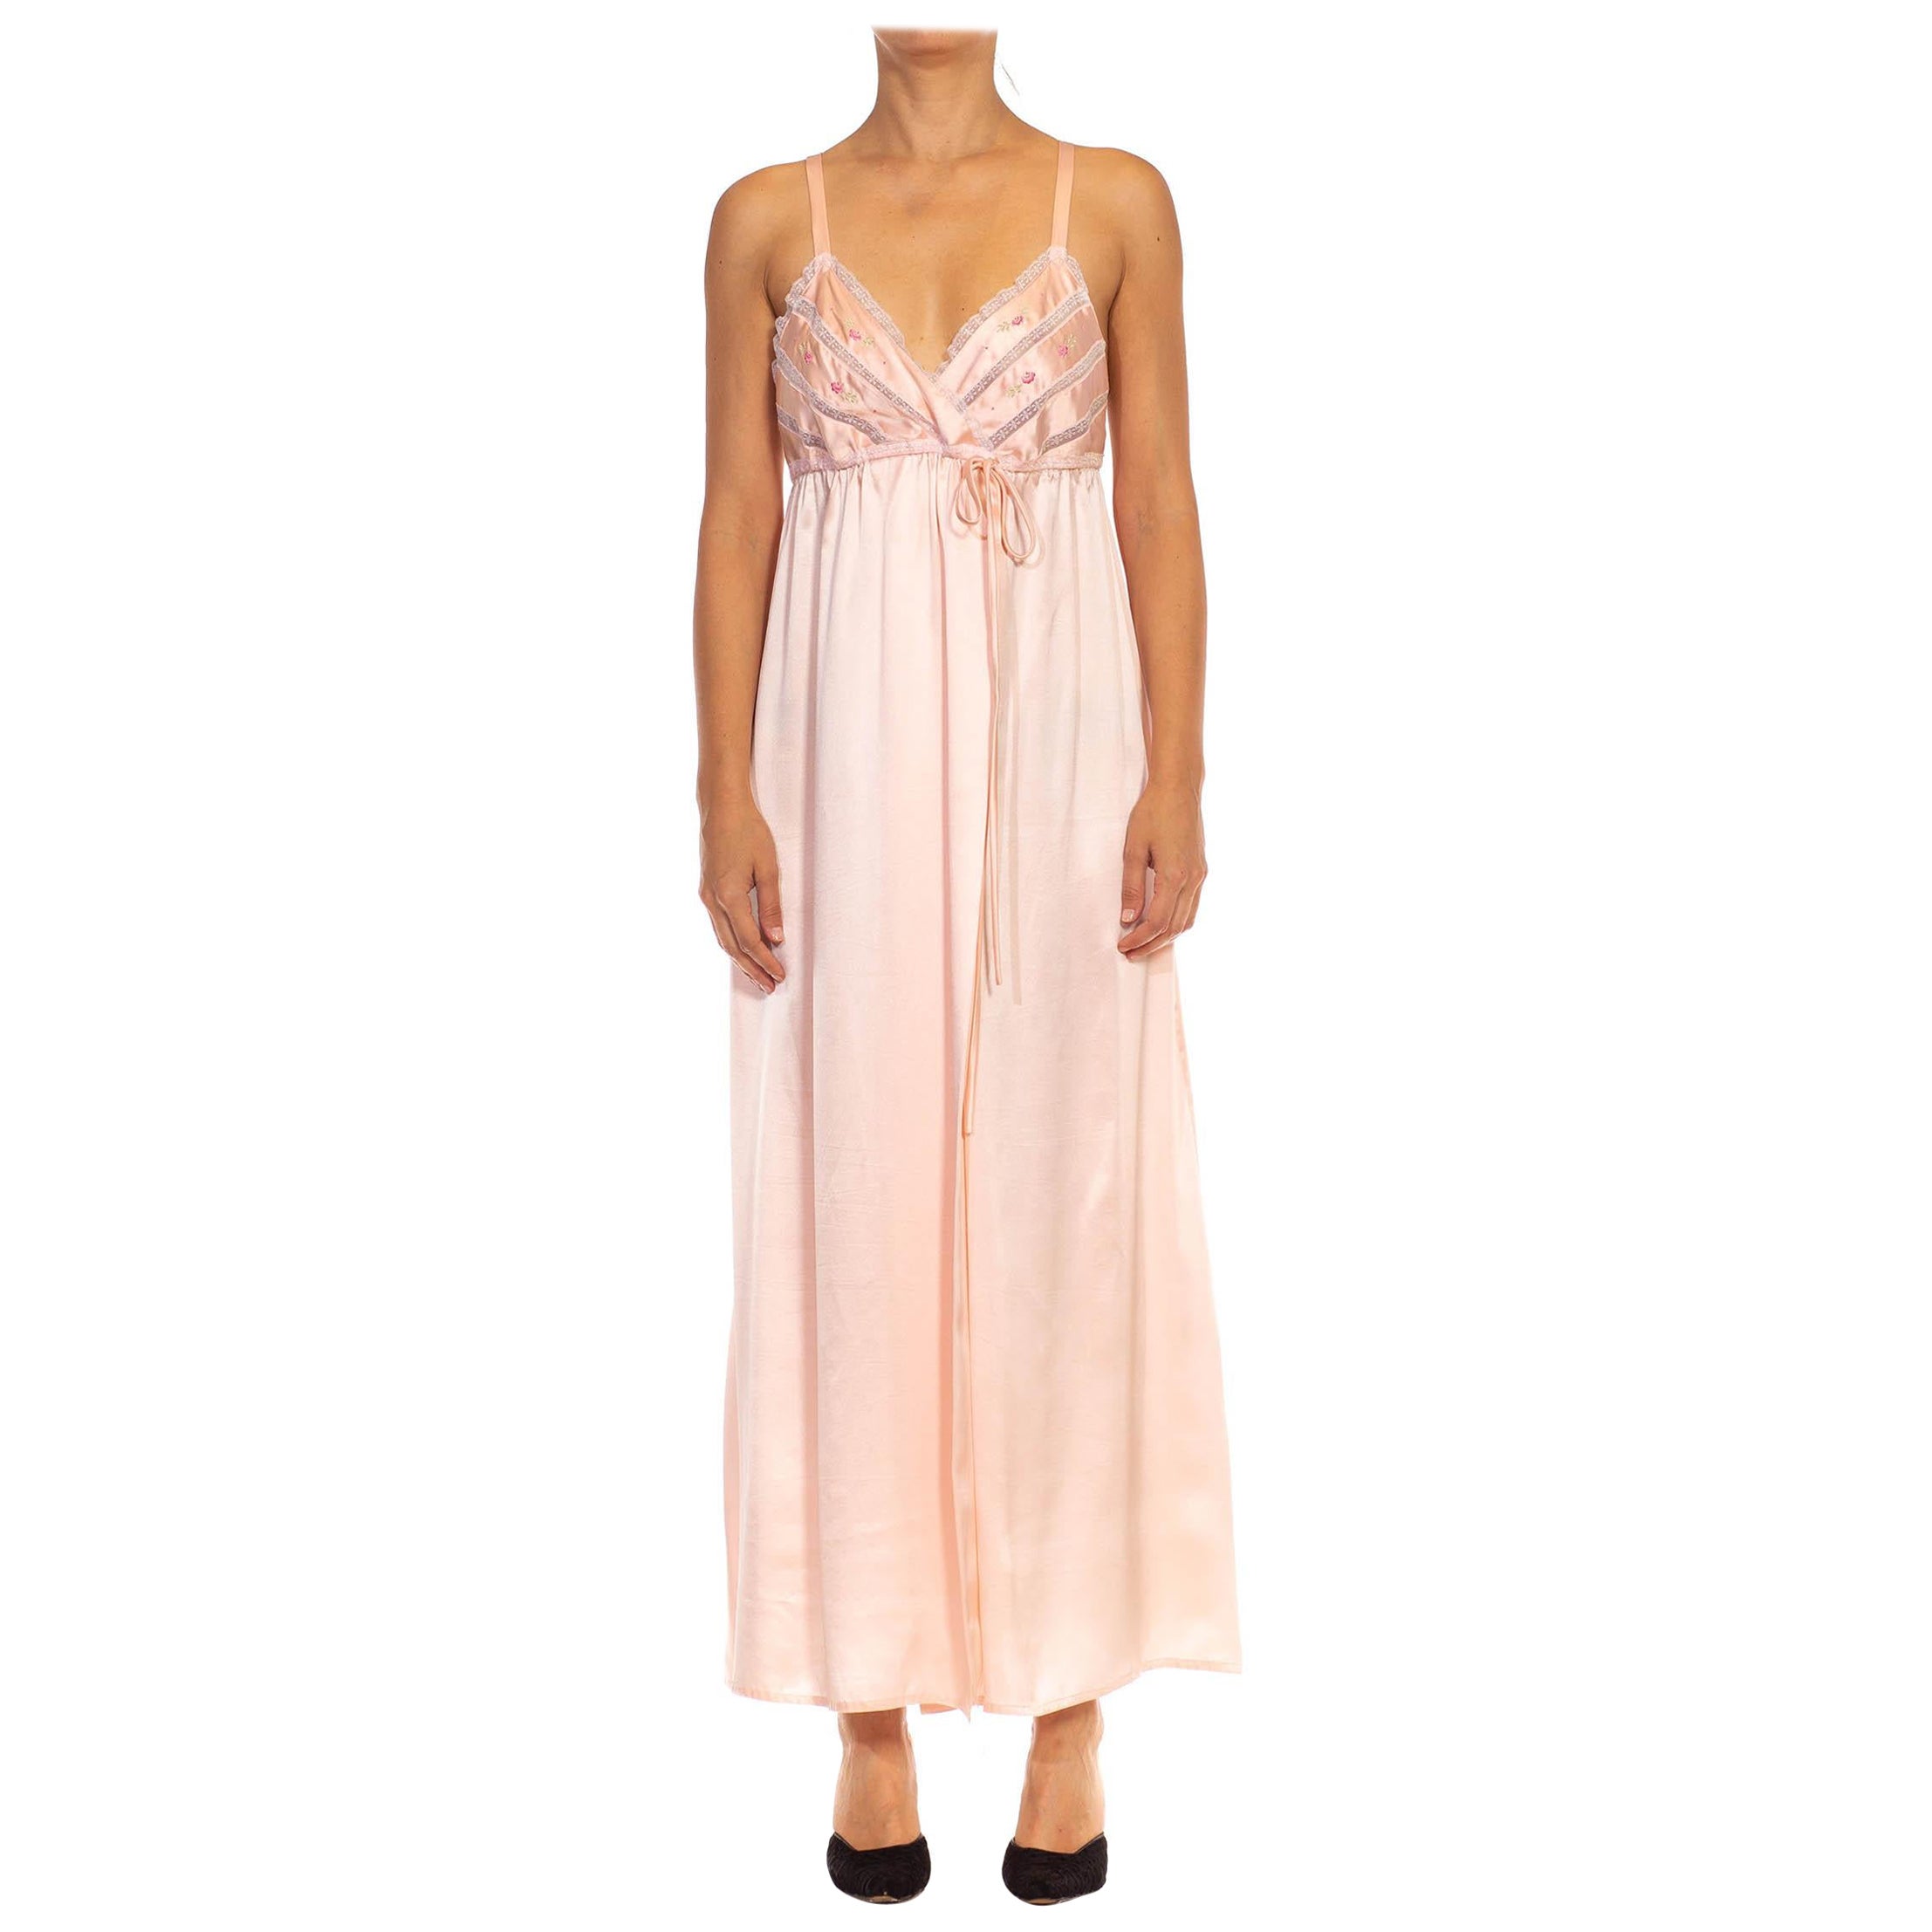 1990S Light Pink Silk Embroidered & Lace Trimming Slip Dress